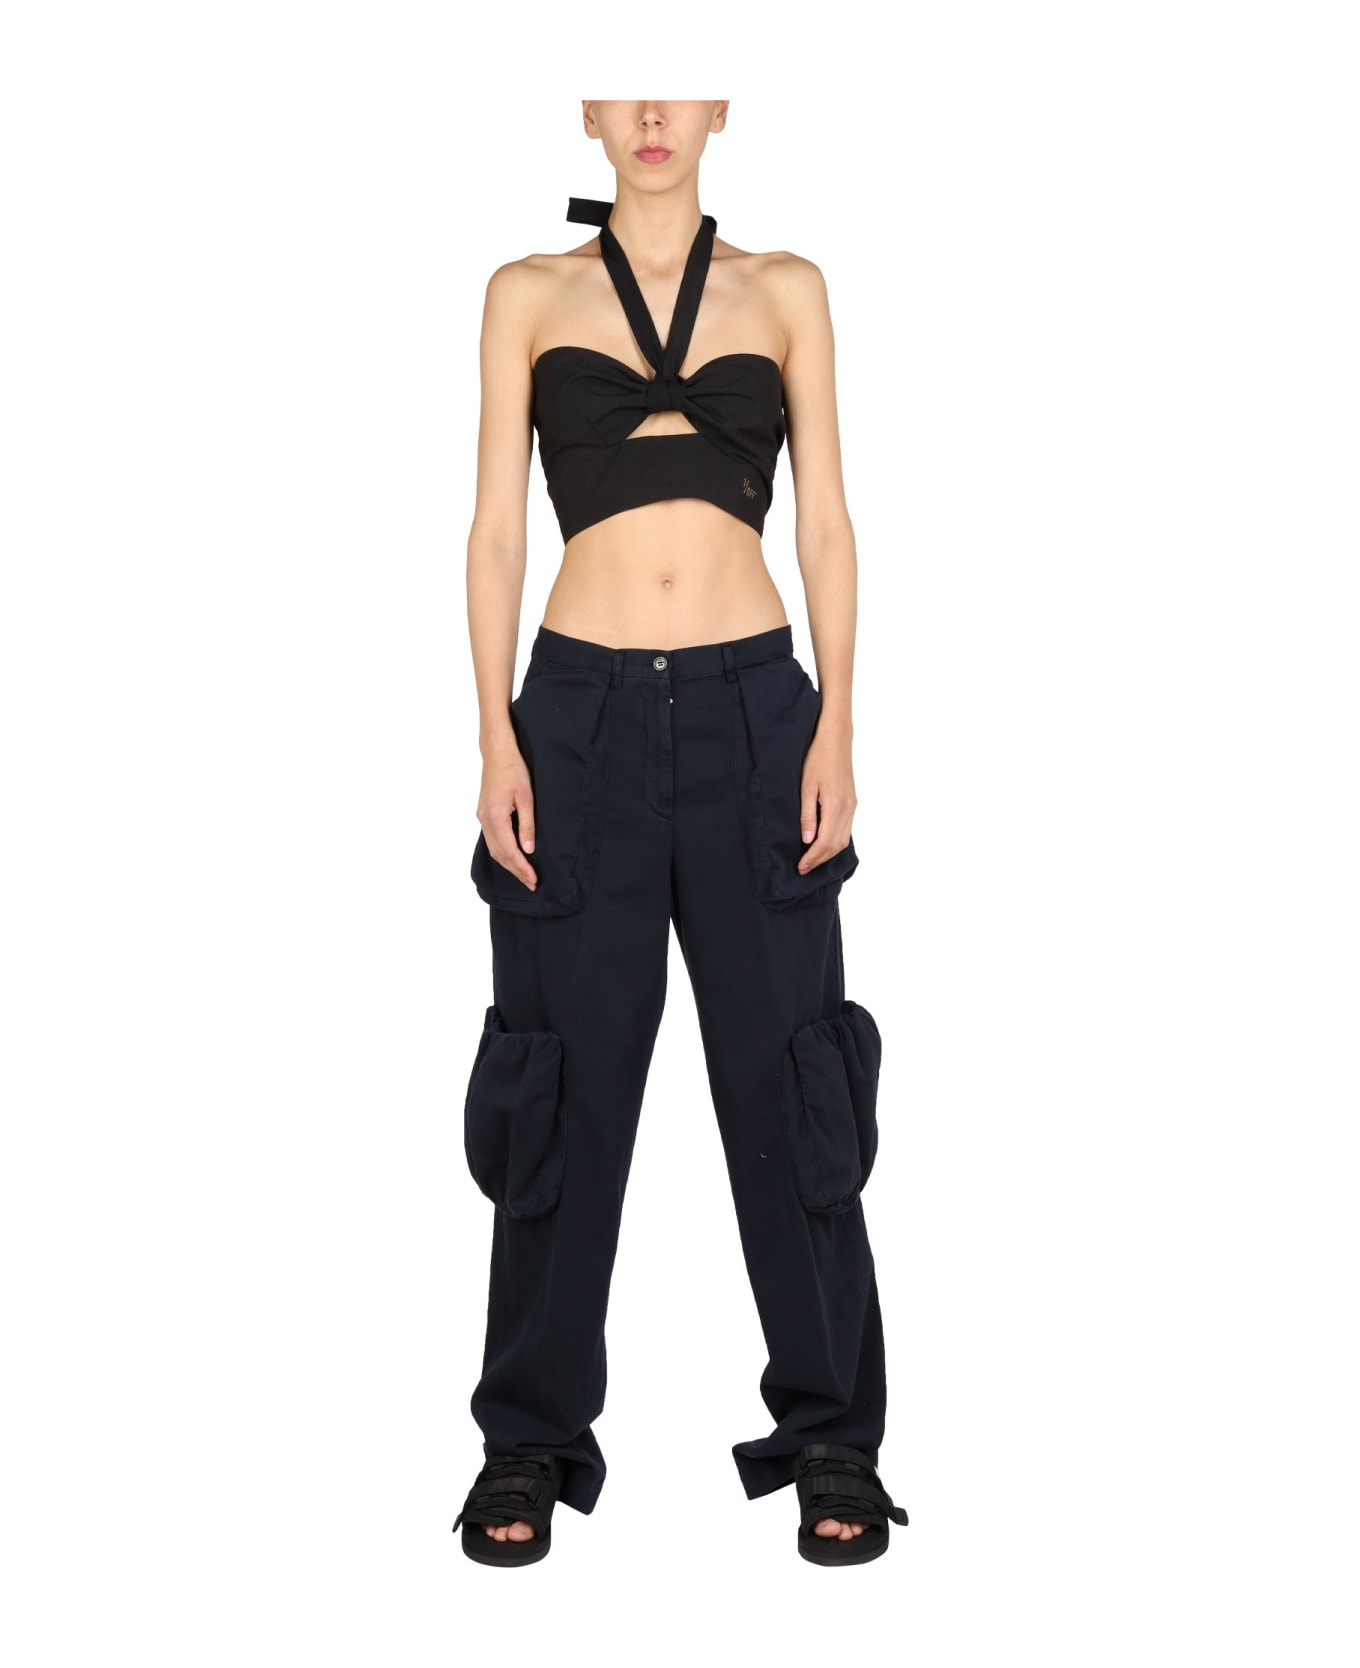 1/OFF Top With Crossed Straps - NERO